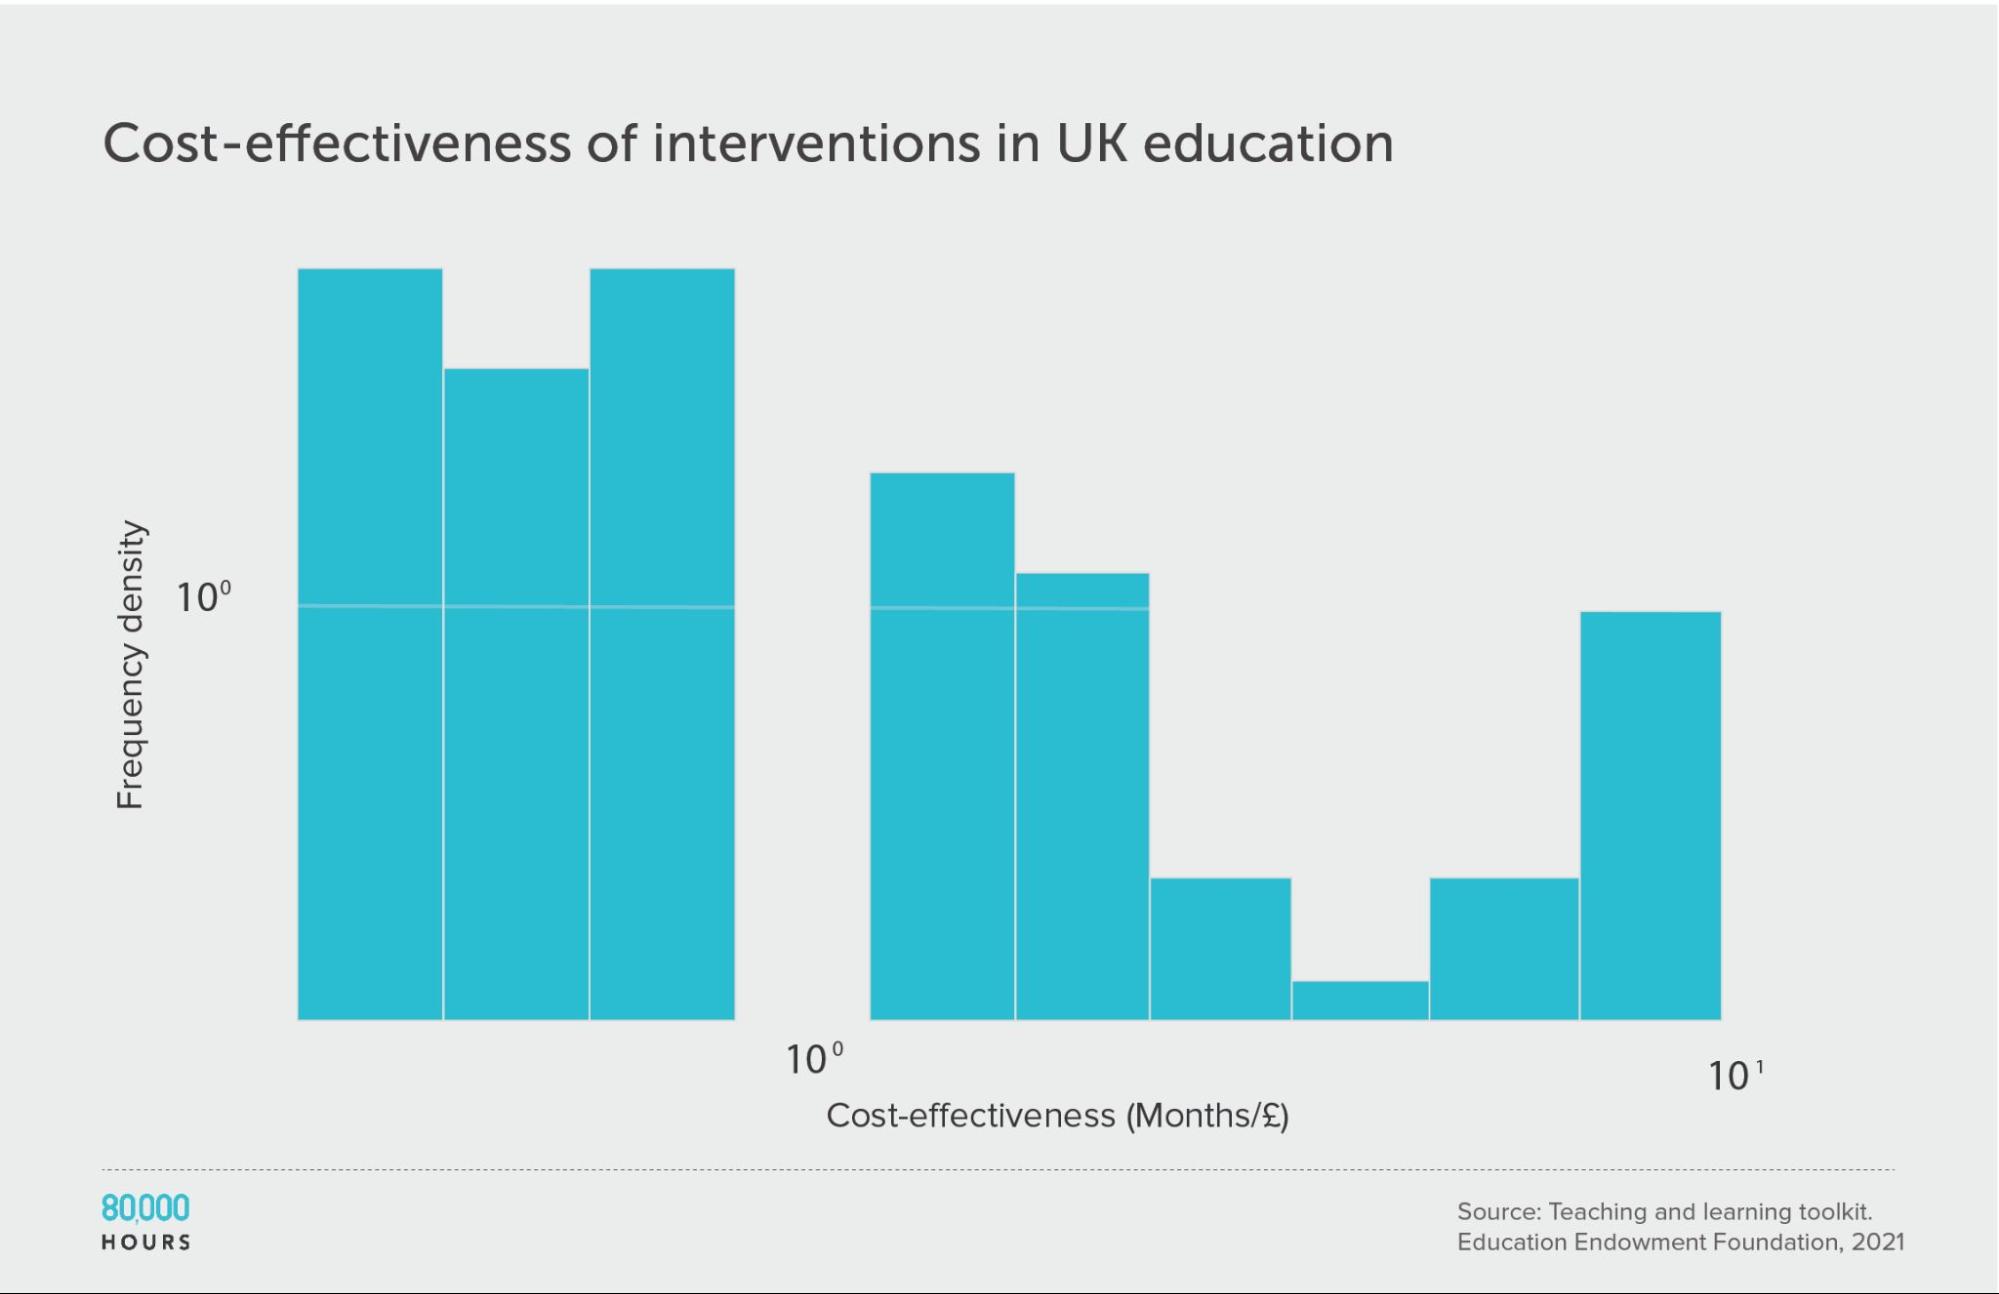 Logarithmic binned histogram of the cost effectiveness of interventions on UK education